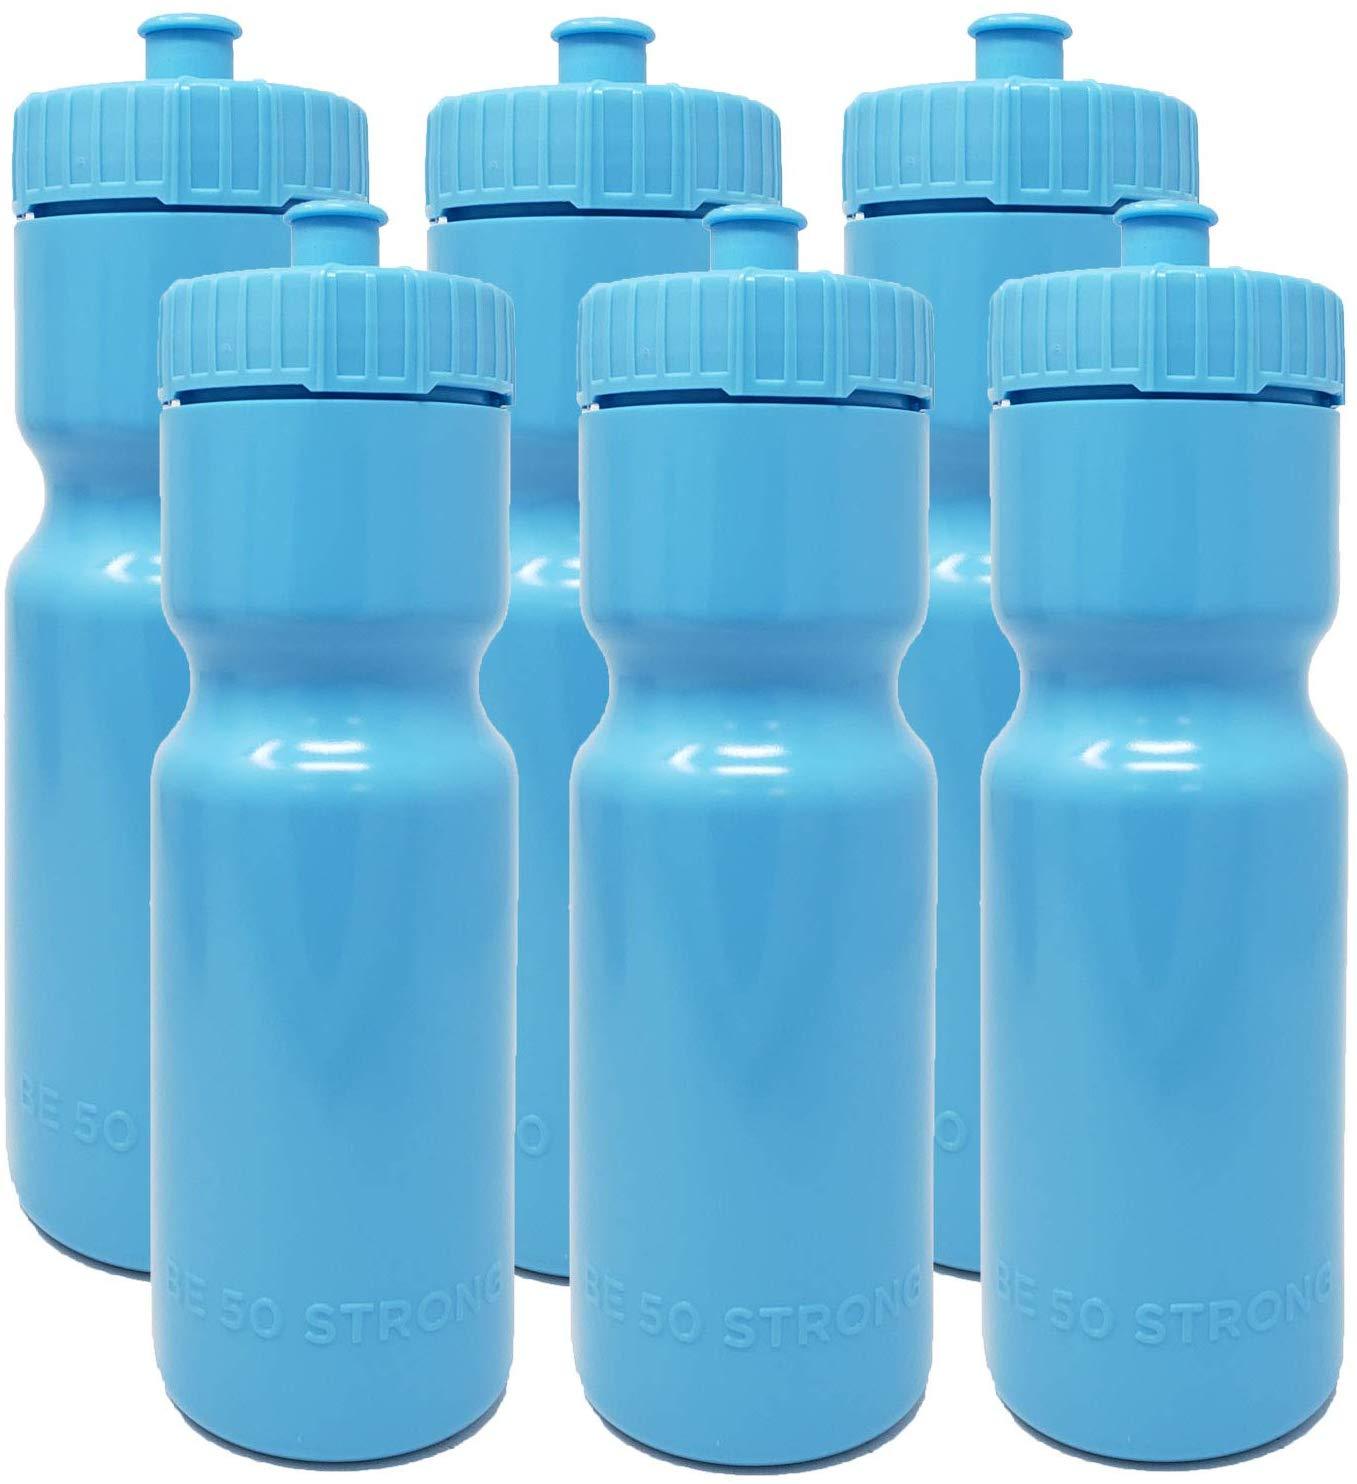 50 Strong Sports Water Bottle | Reusable Squeeze Water Bottles | 22 oz.  BPA-Free Plastic Bottles wit…See more 50 Strong Sports Water Bottle |  Reusable